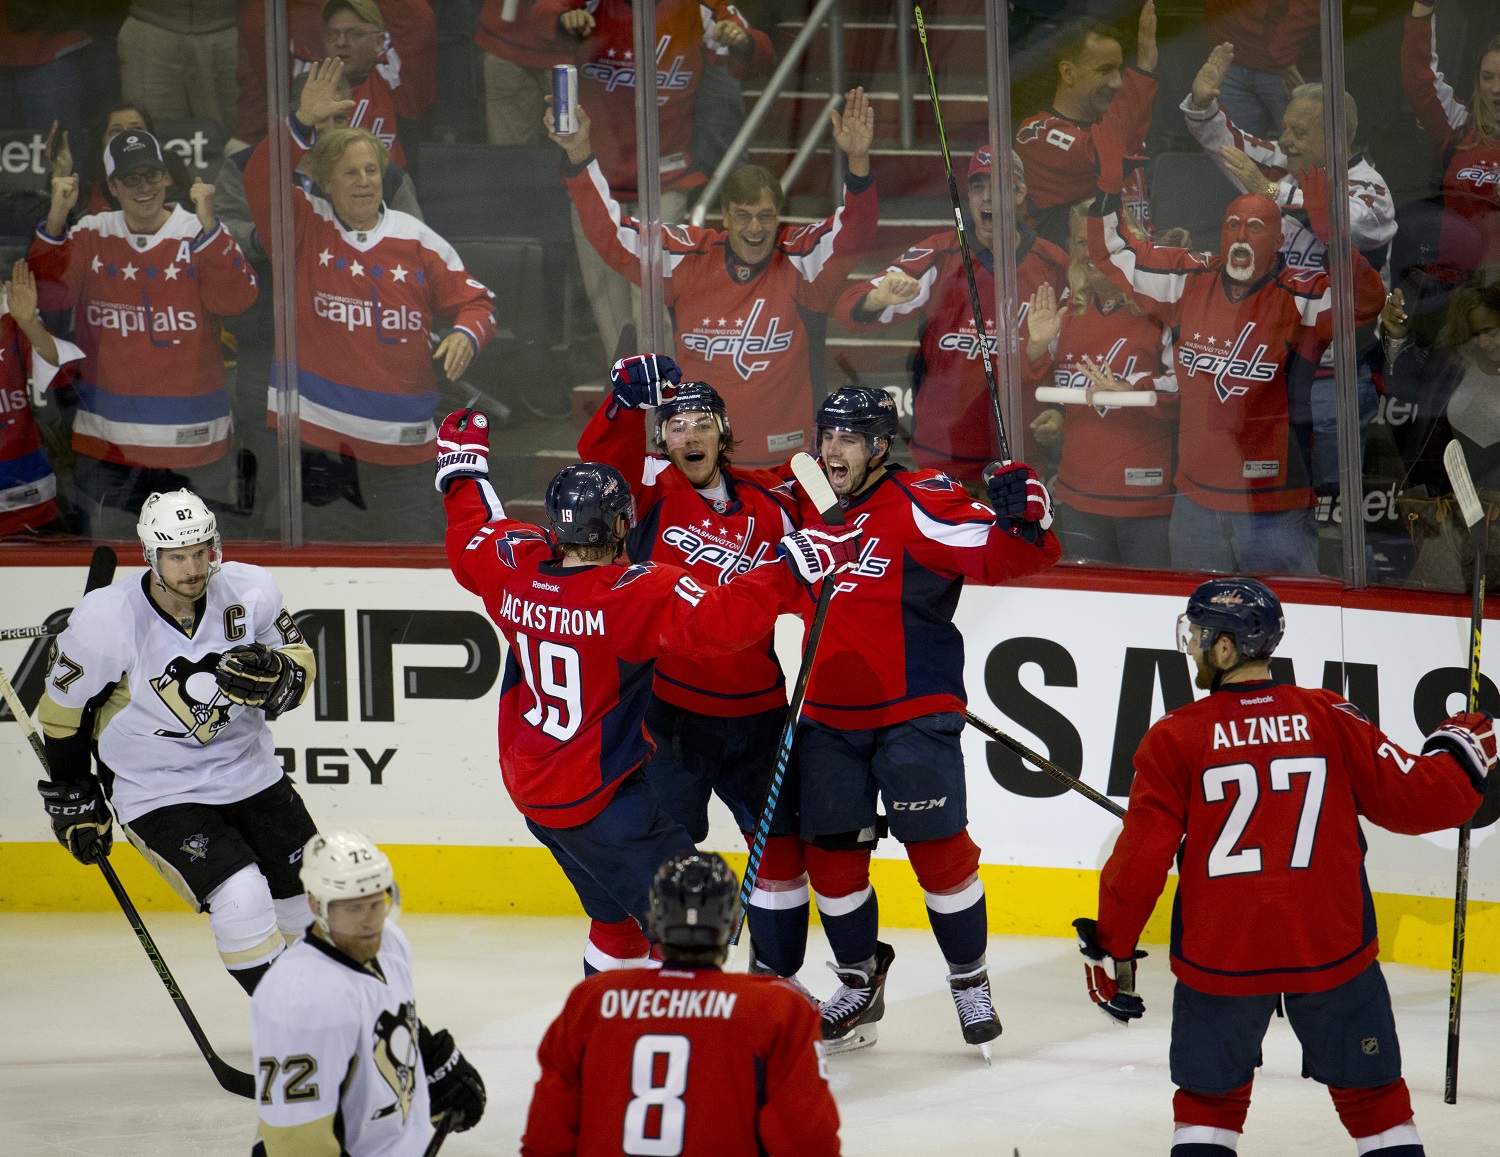 Washington Capitals T.J. Oshie (77) celebrates his second goal against Pittsburgh Penguins with teammates Nicklas Backstrom (19) and Karl Alzner (27), during the third period of Game 1 in an NHL hockey Stanley Cup Eastern Conference semifinal series Thursday, April 28, 2016, in Washington. The Capitals won 4-3 in overtime. (AP Photo/Pablo Martinez Monsivais)